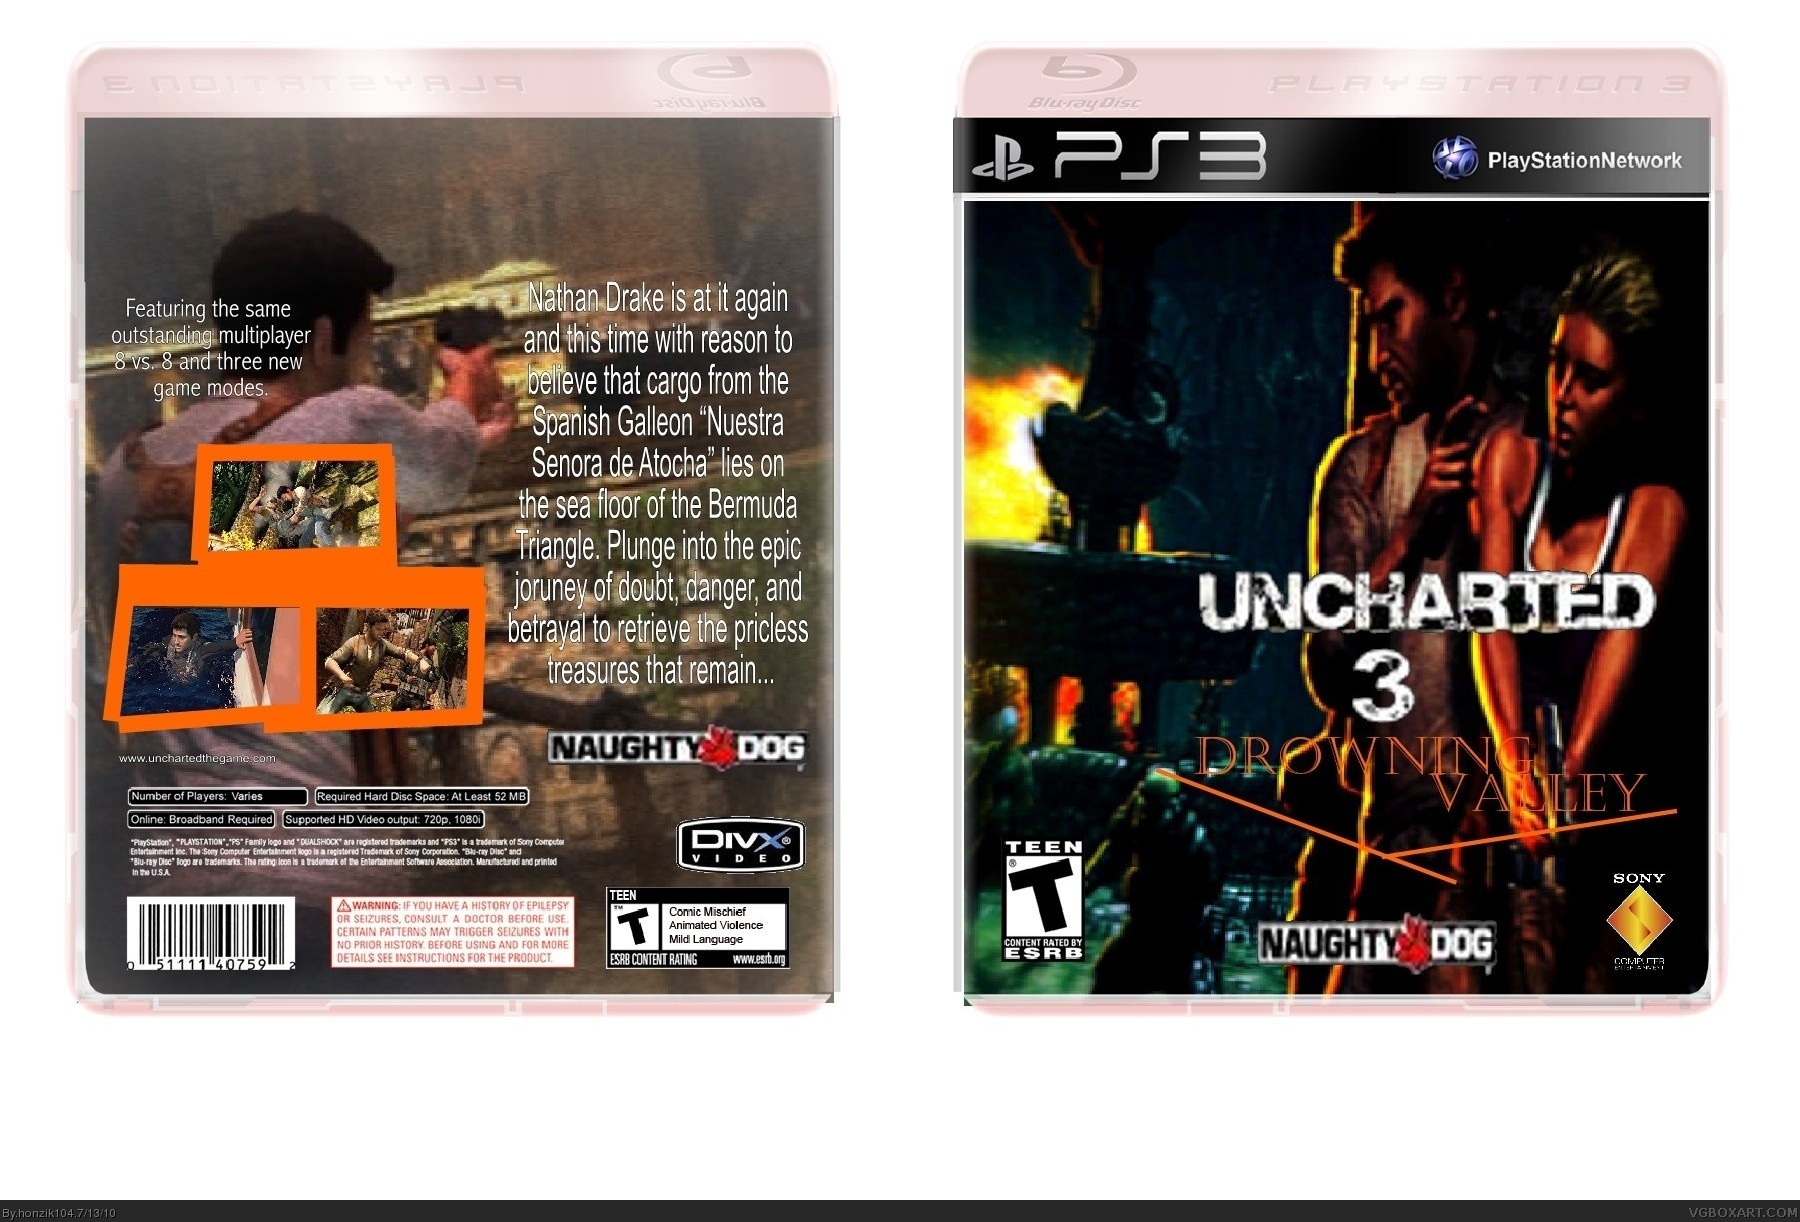 Uncharted 3: Drowning Valley box cover